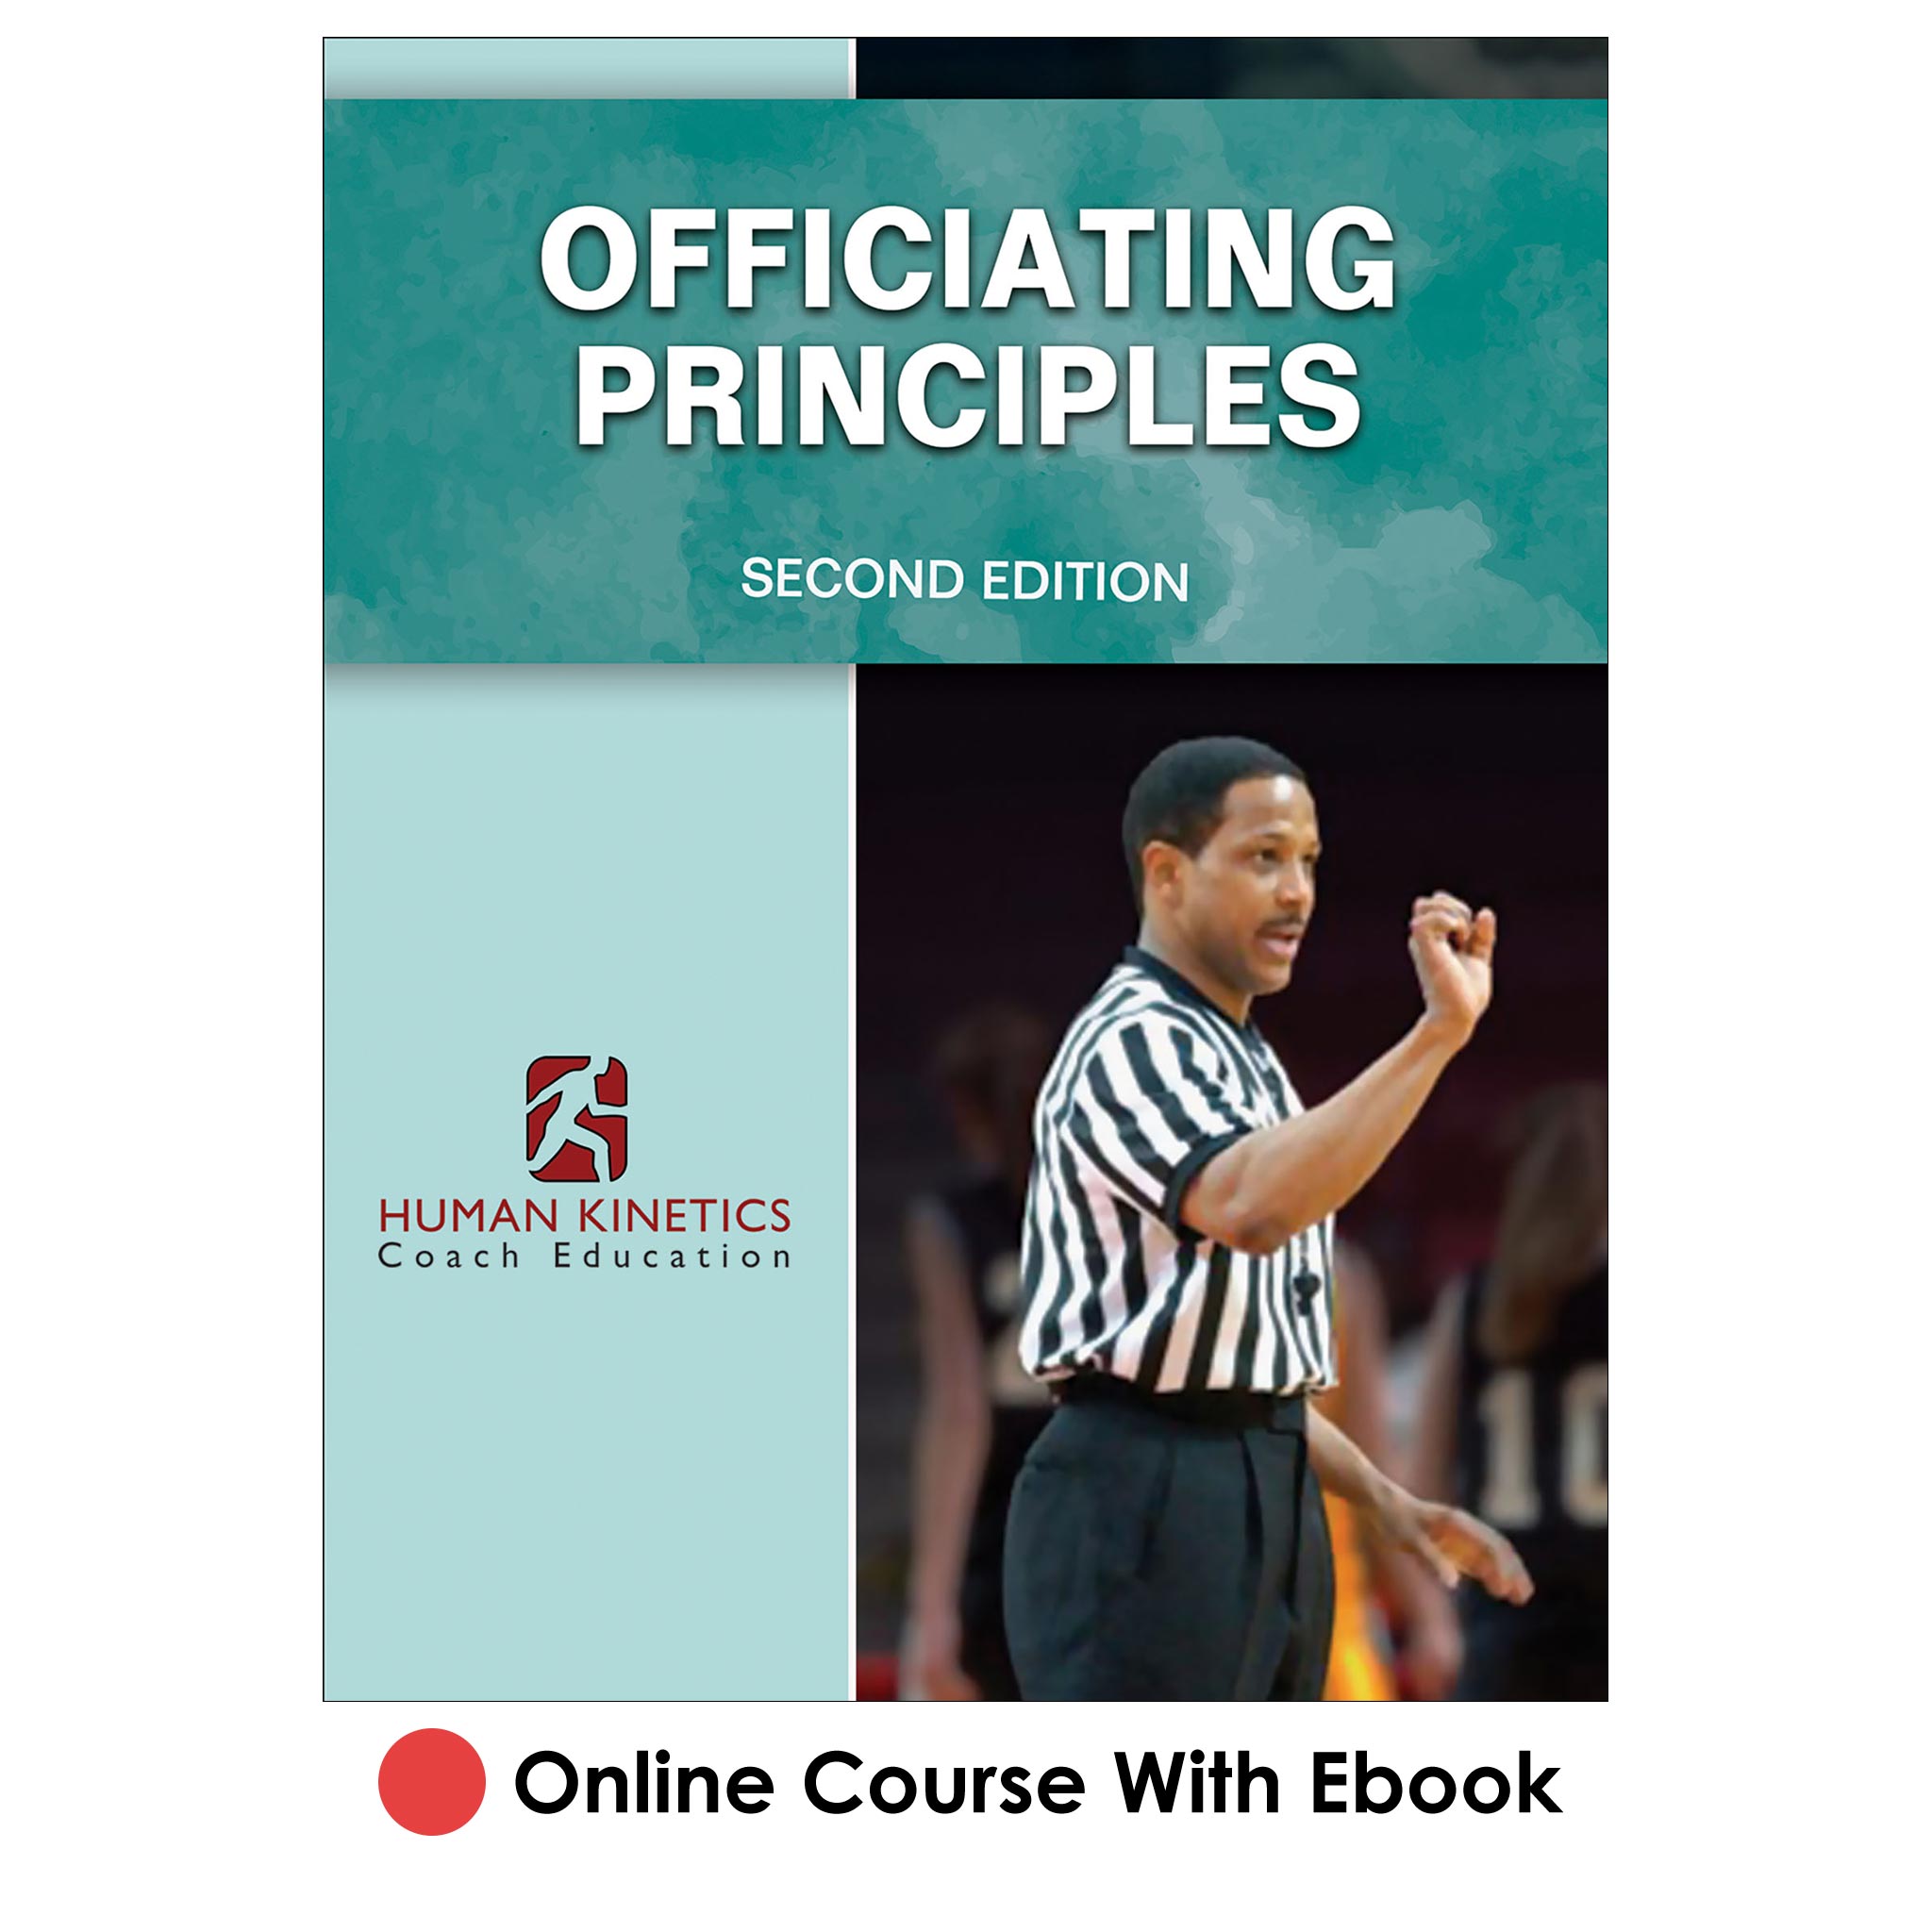 Officiating Principles 2nd Edition Online Course With Ebook